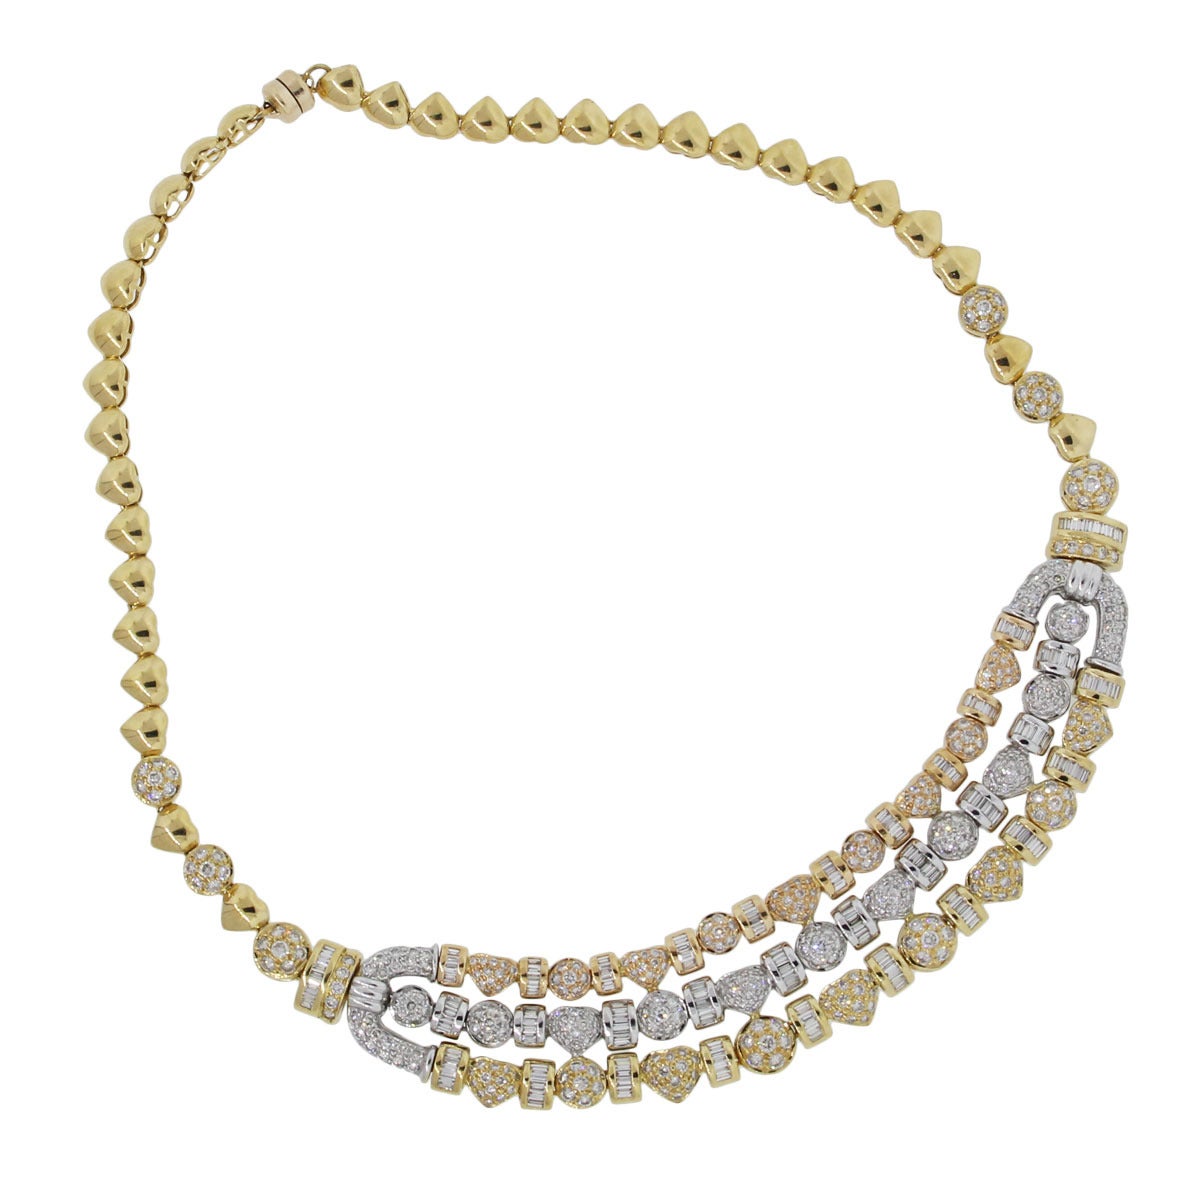 Style: 18k Tri Tone and Diamond Necklace
Diamond Details: Approximately 6.5ctw of Round Brilliant and Baguette shape Diamonds, G/H in color and VS in clarity. 
Chain Length: 14.25''
Total Weight: 4.8g (7.5dwt)
Clasp: Magnet Clasp
Comes With: